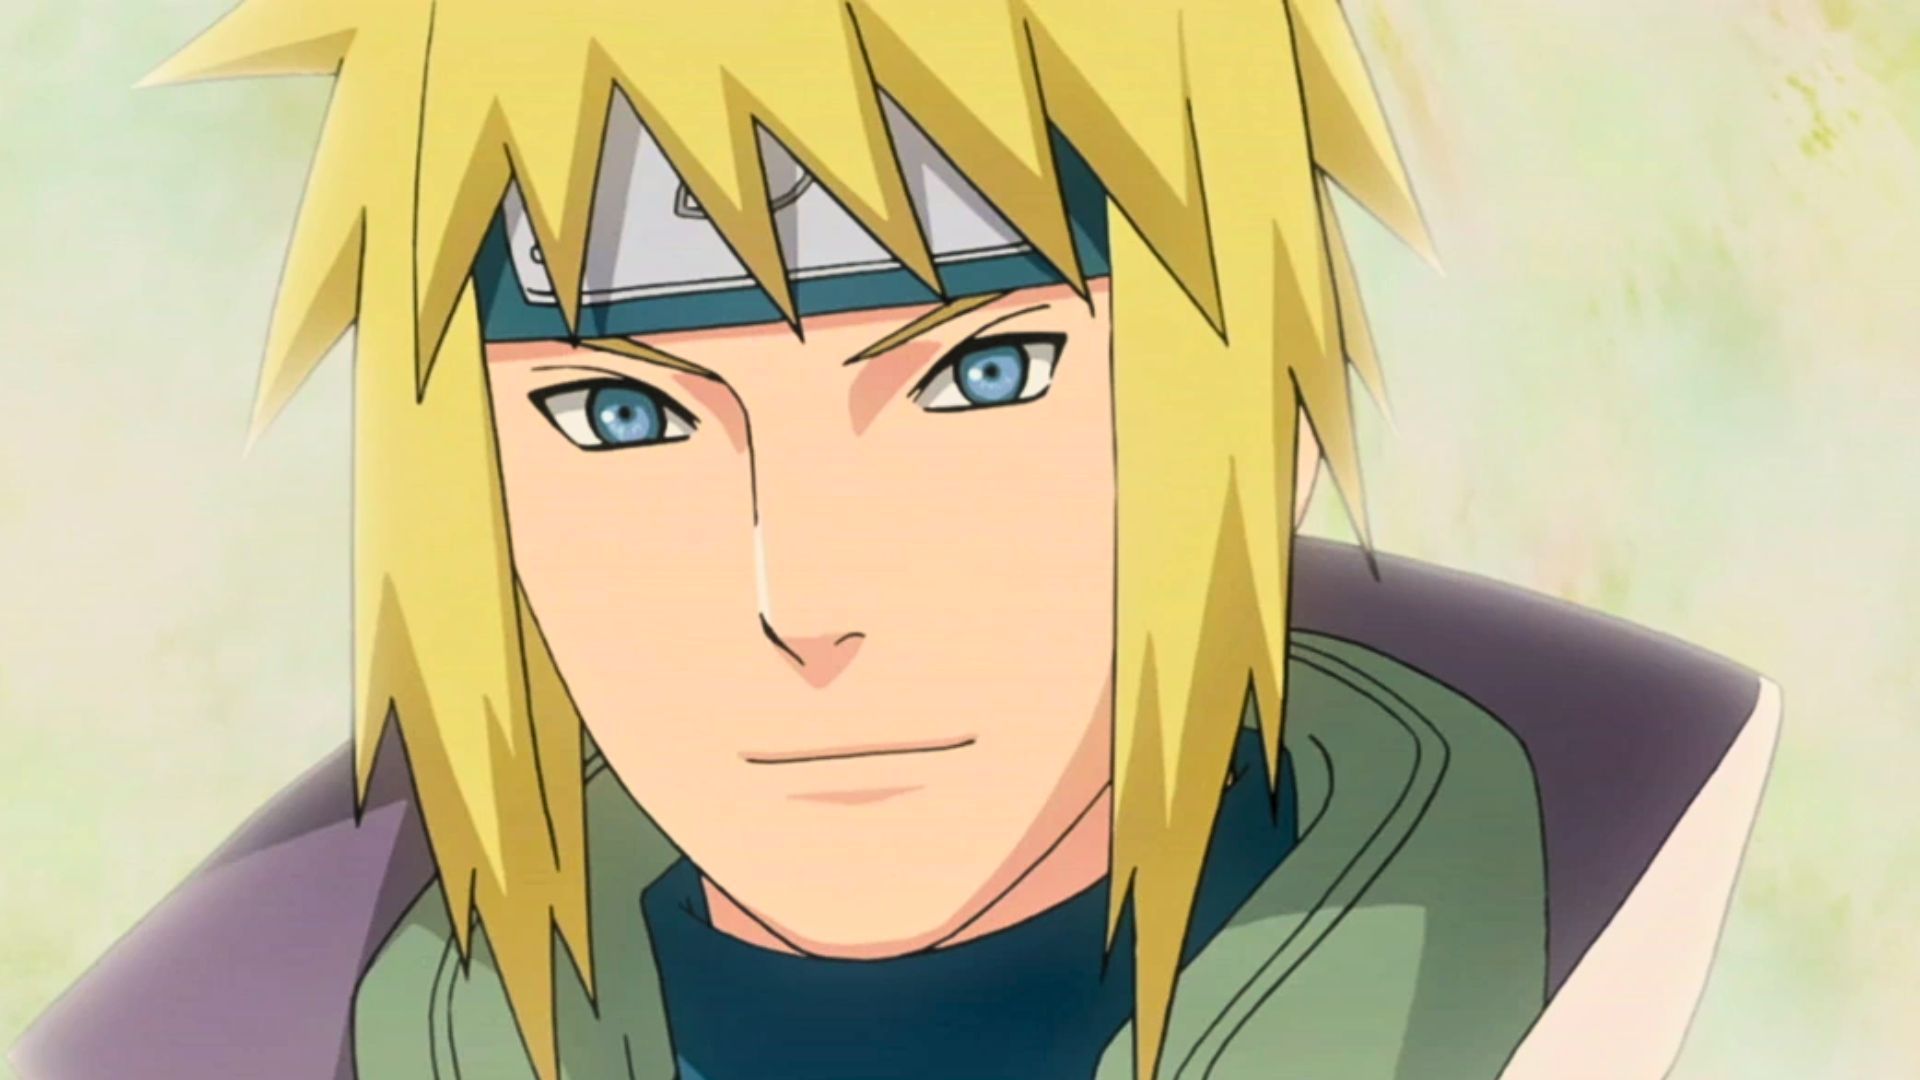 Twitter explodes as Minato sweeps NarutoP99 polls with 792,257 votes (Image via Pierrot)